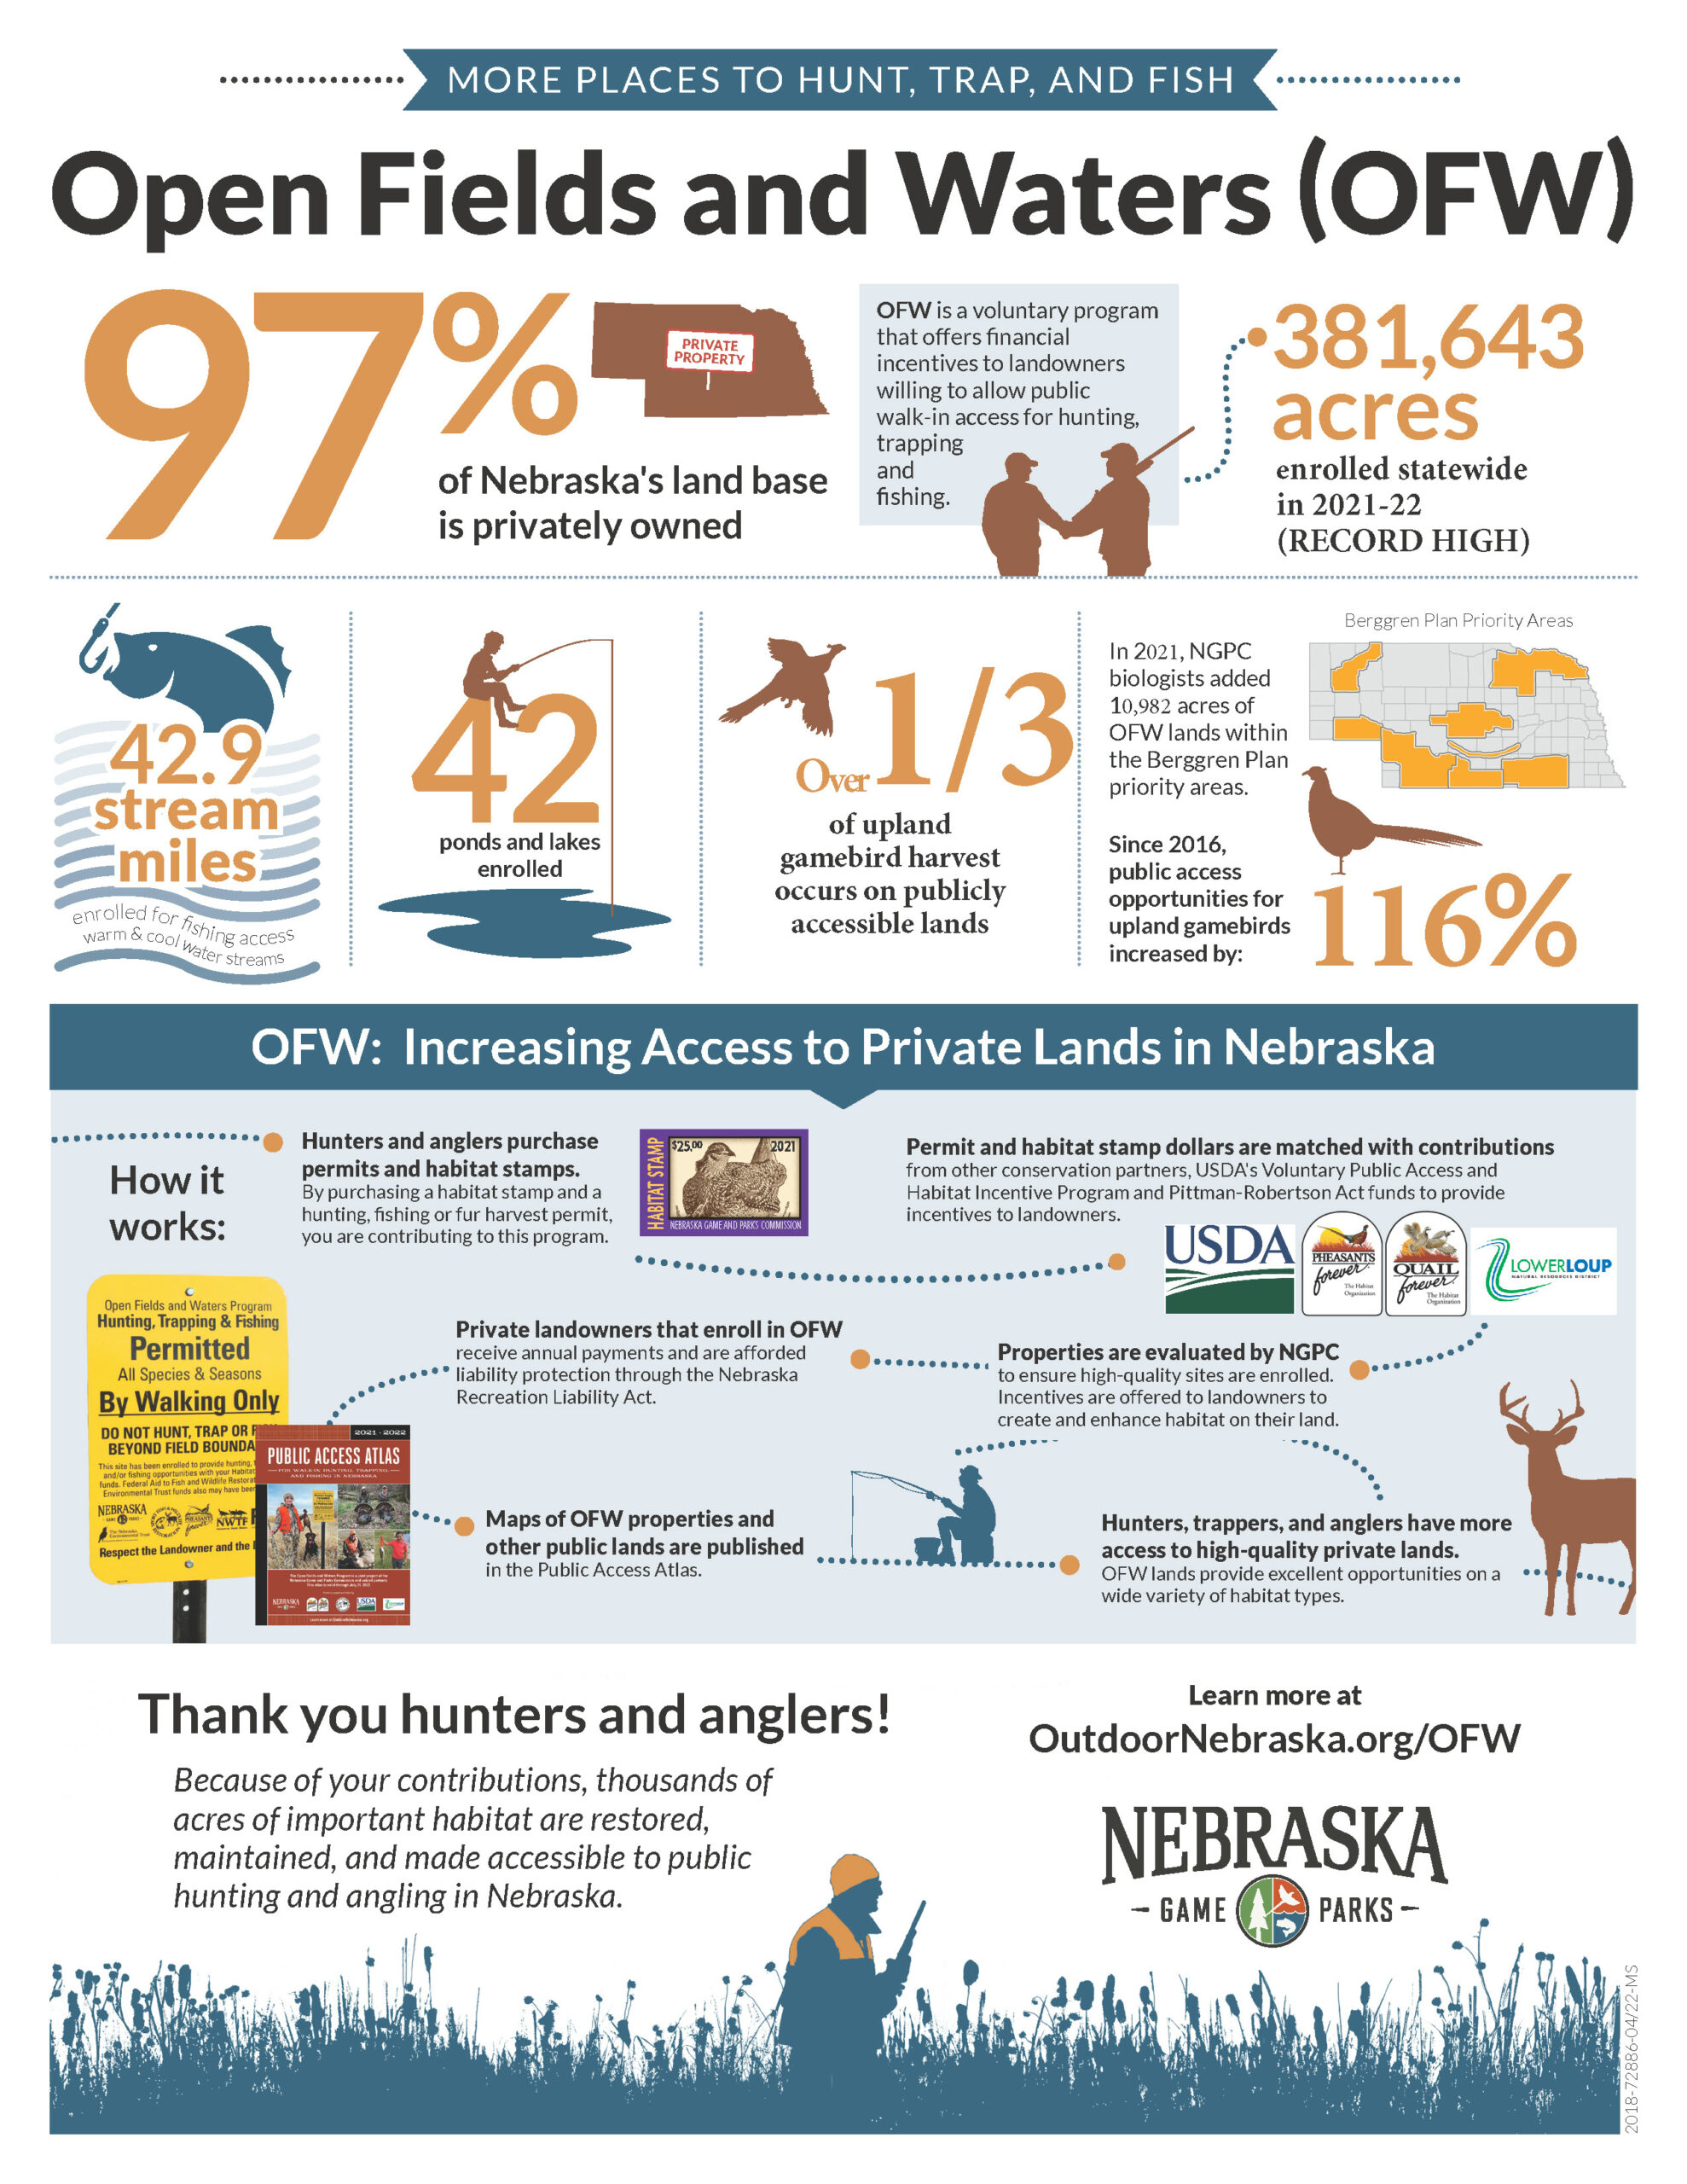 Open Fields and Waters infographic shows statistics about the program and how it works.